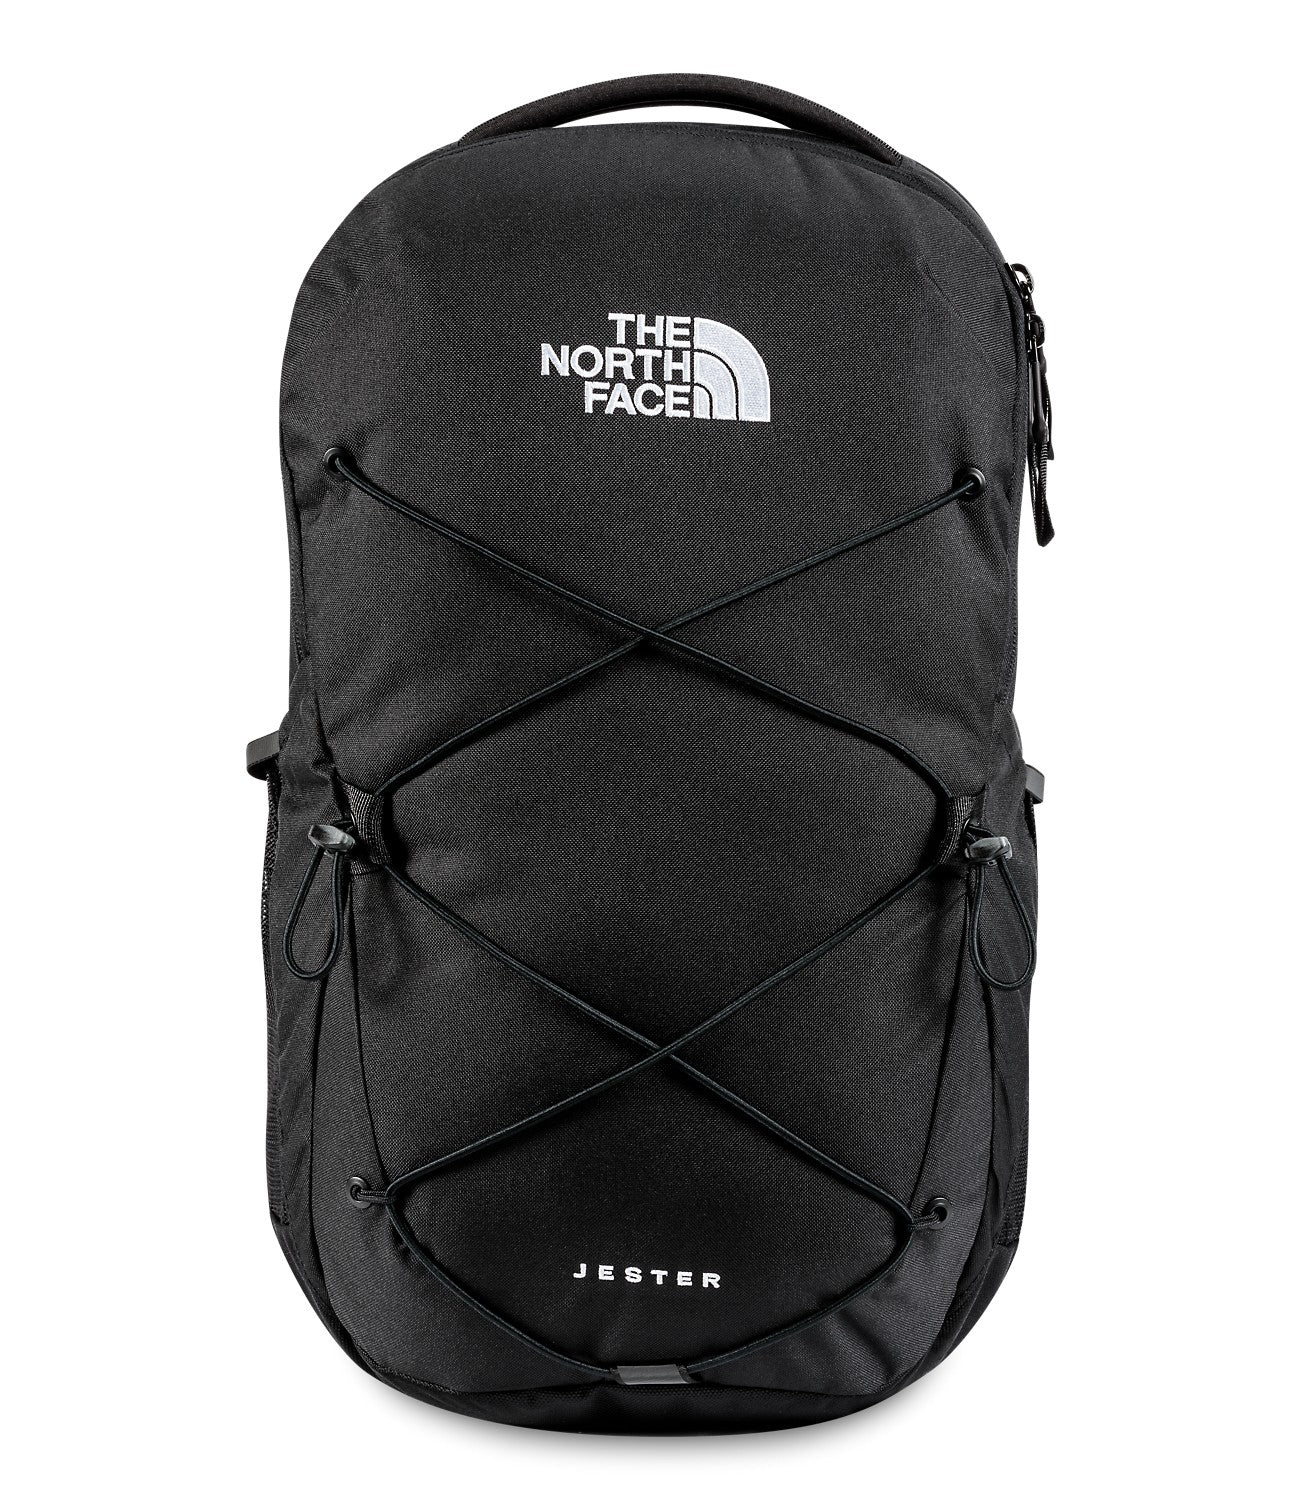 The North Face Jester Backpack Accessories North Face TNF Black-4H0  